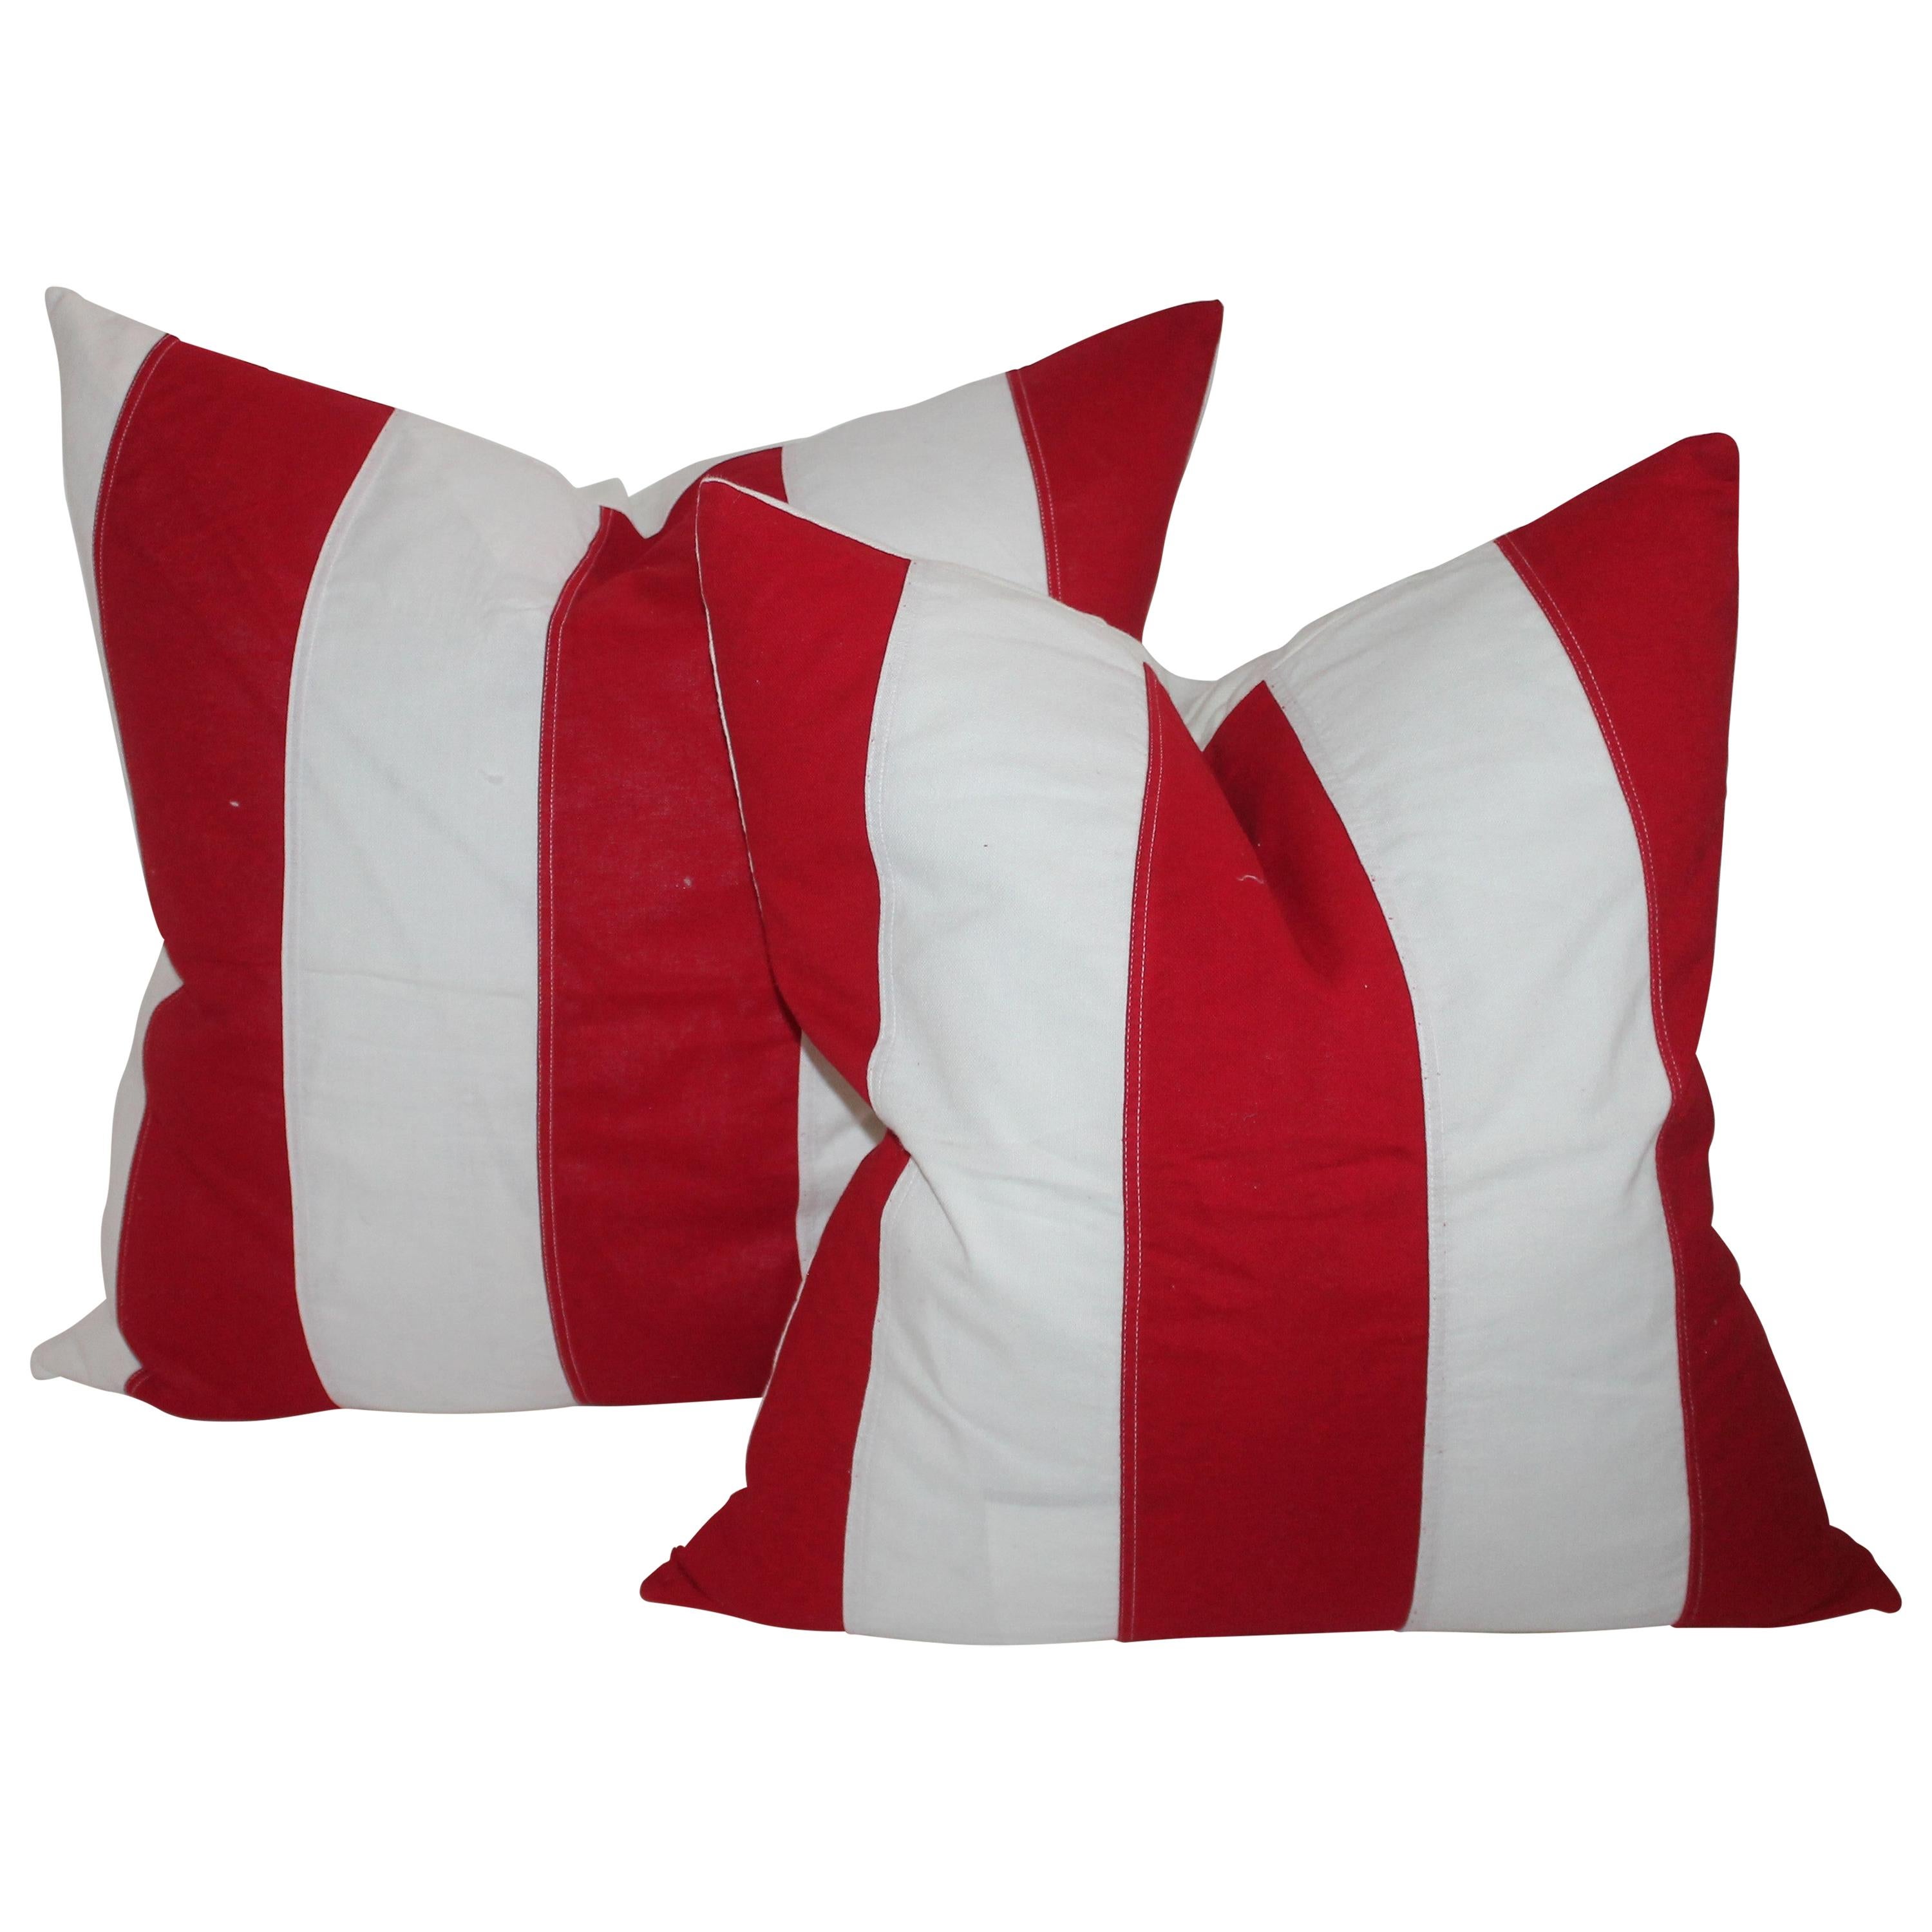 Vintage Striped Red and White Flag Pillows For Sale